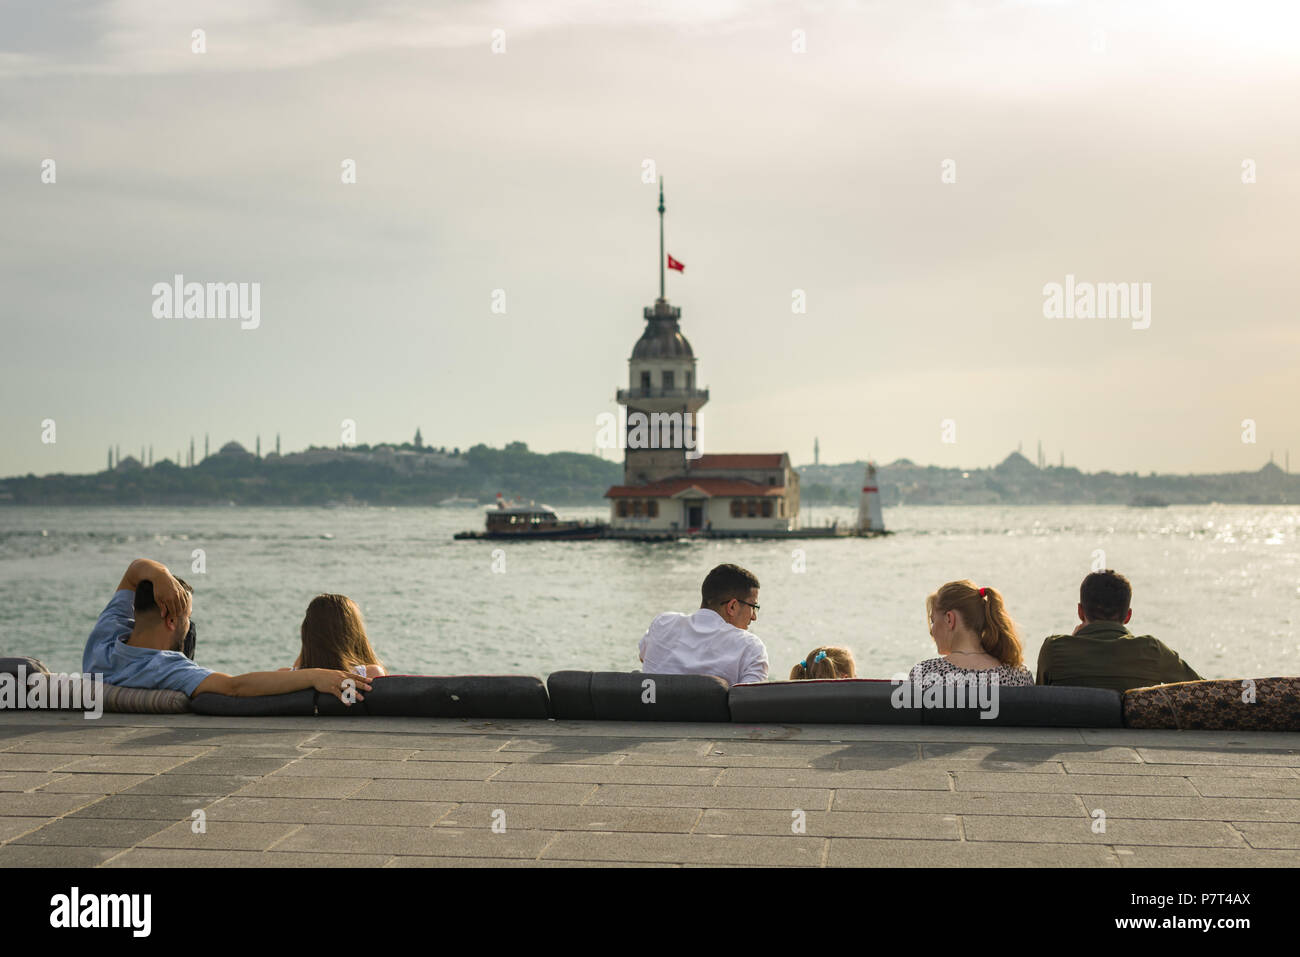 People sitting enjoying the view with Maiden's Tower or Kız Kulesi in the background, Istanbul, Turkey Stock Photo